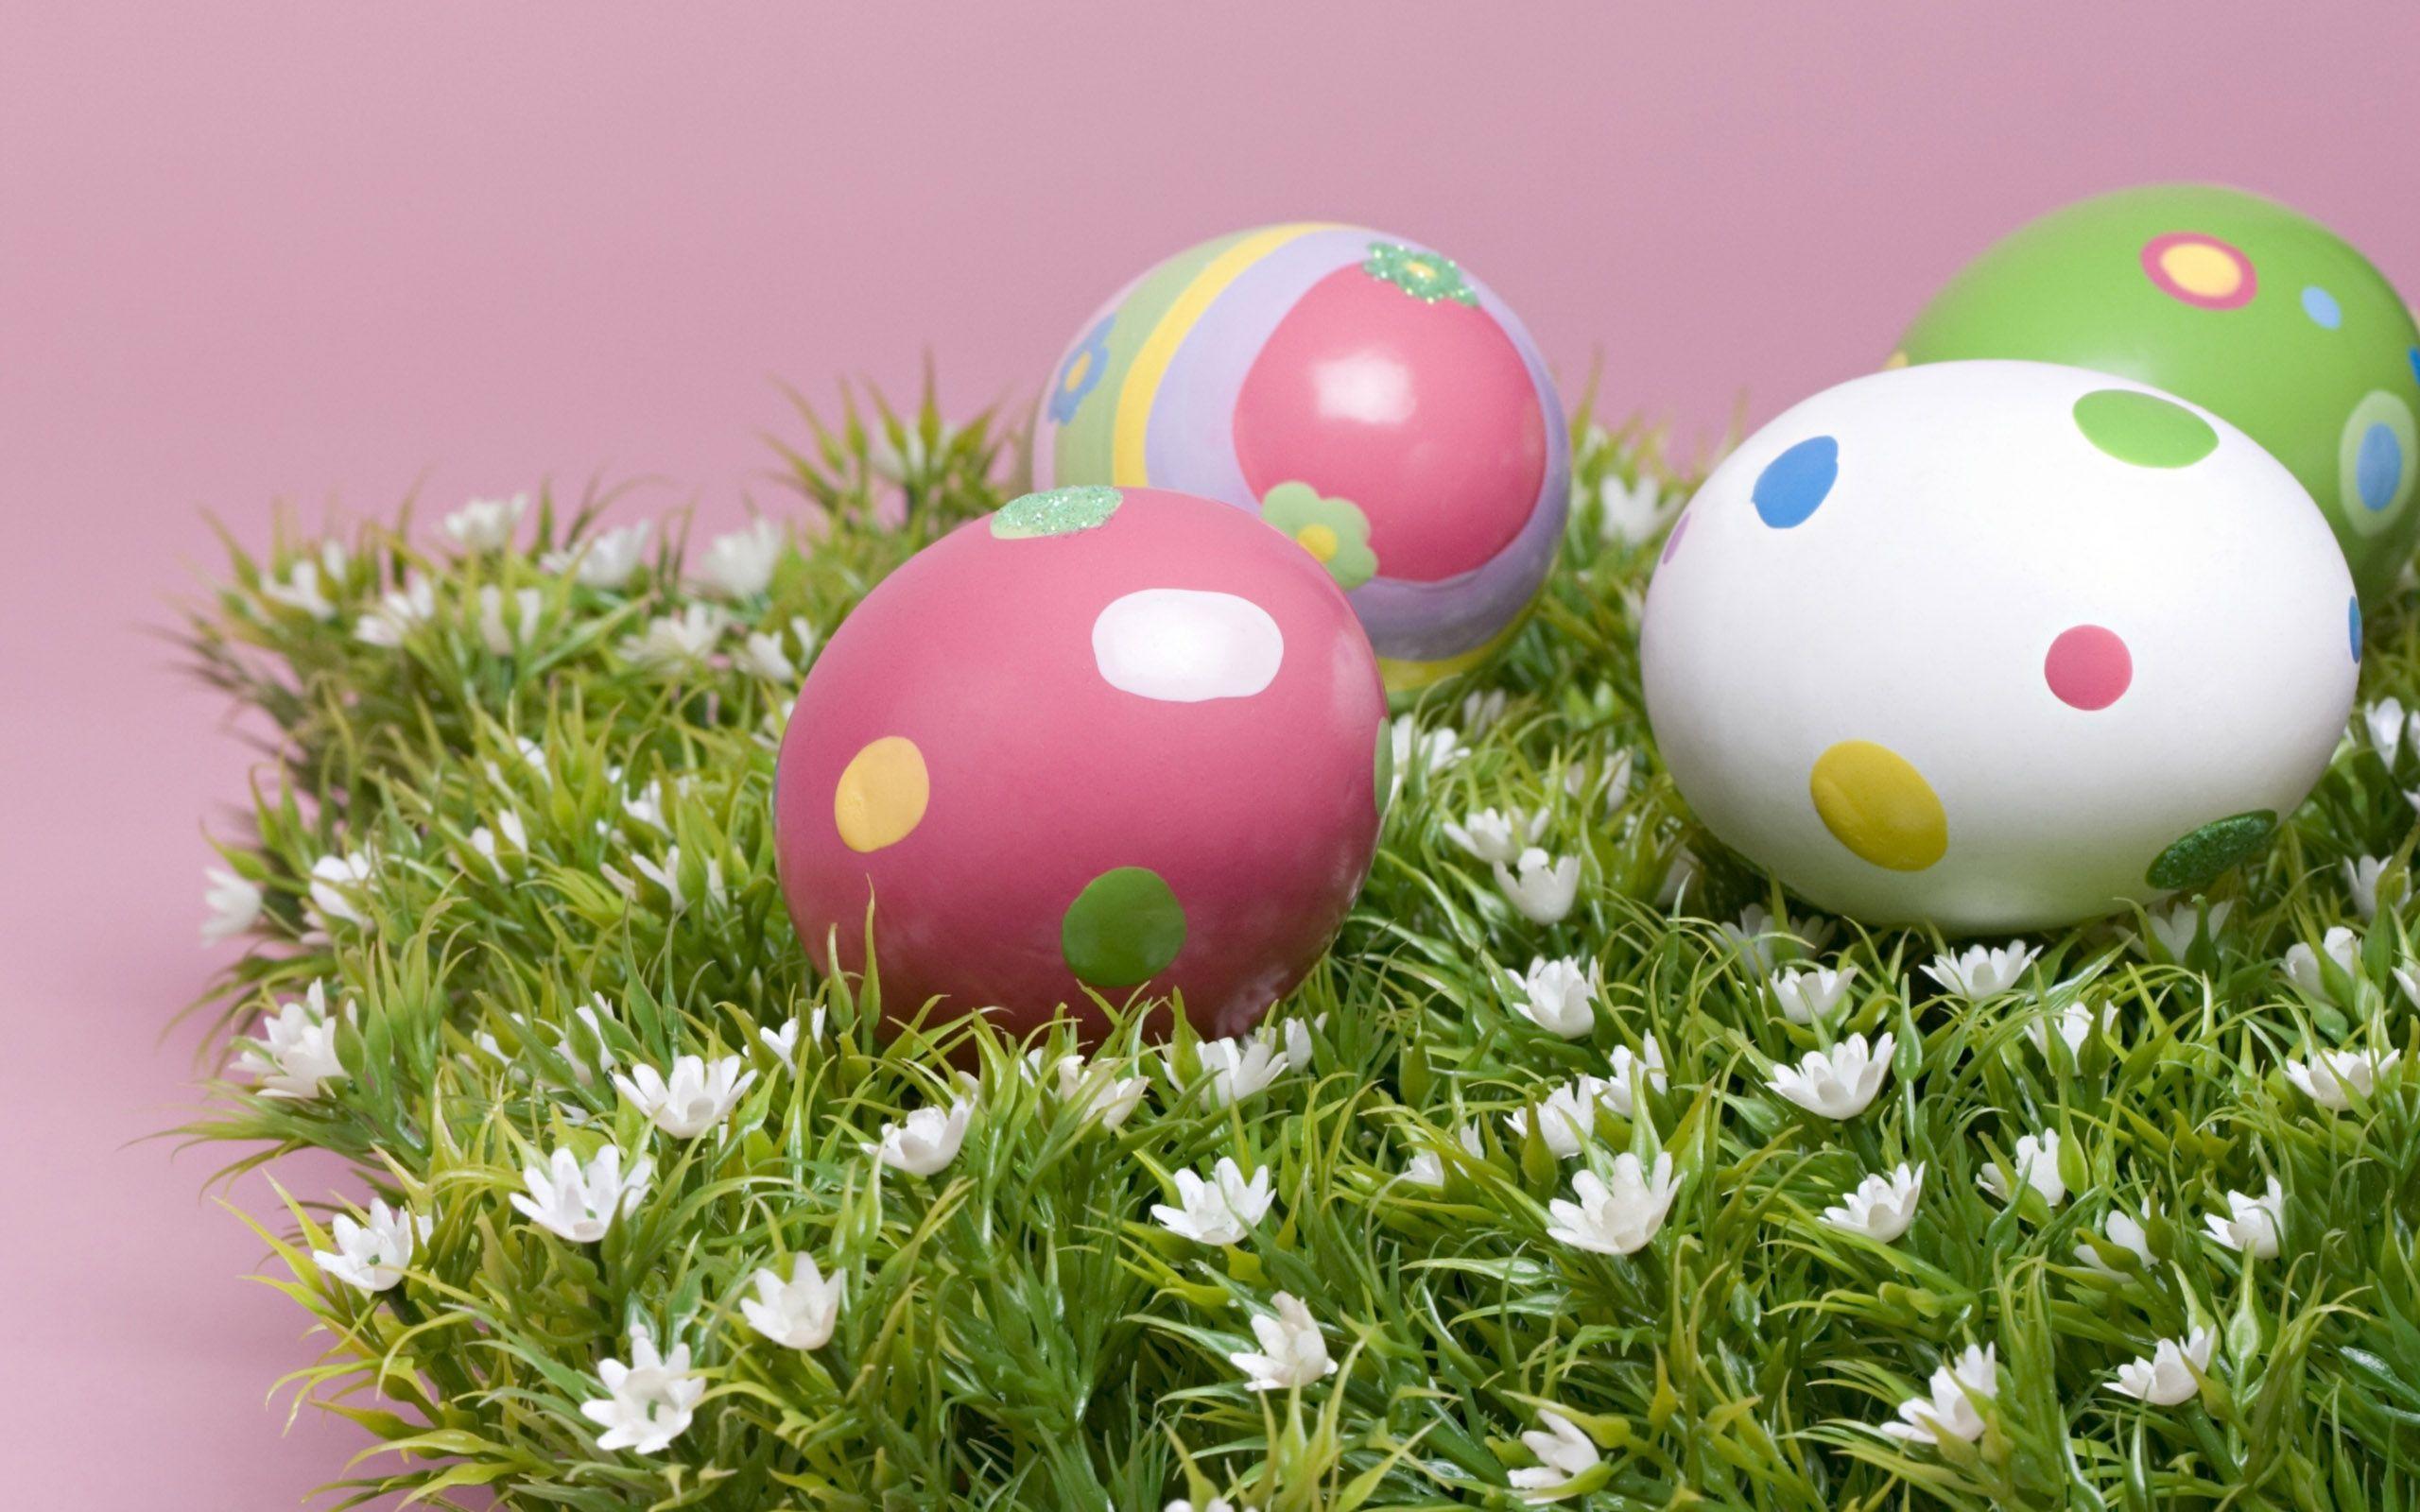 Wallpapers For > Cute Easter Egg Wallpapers